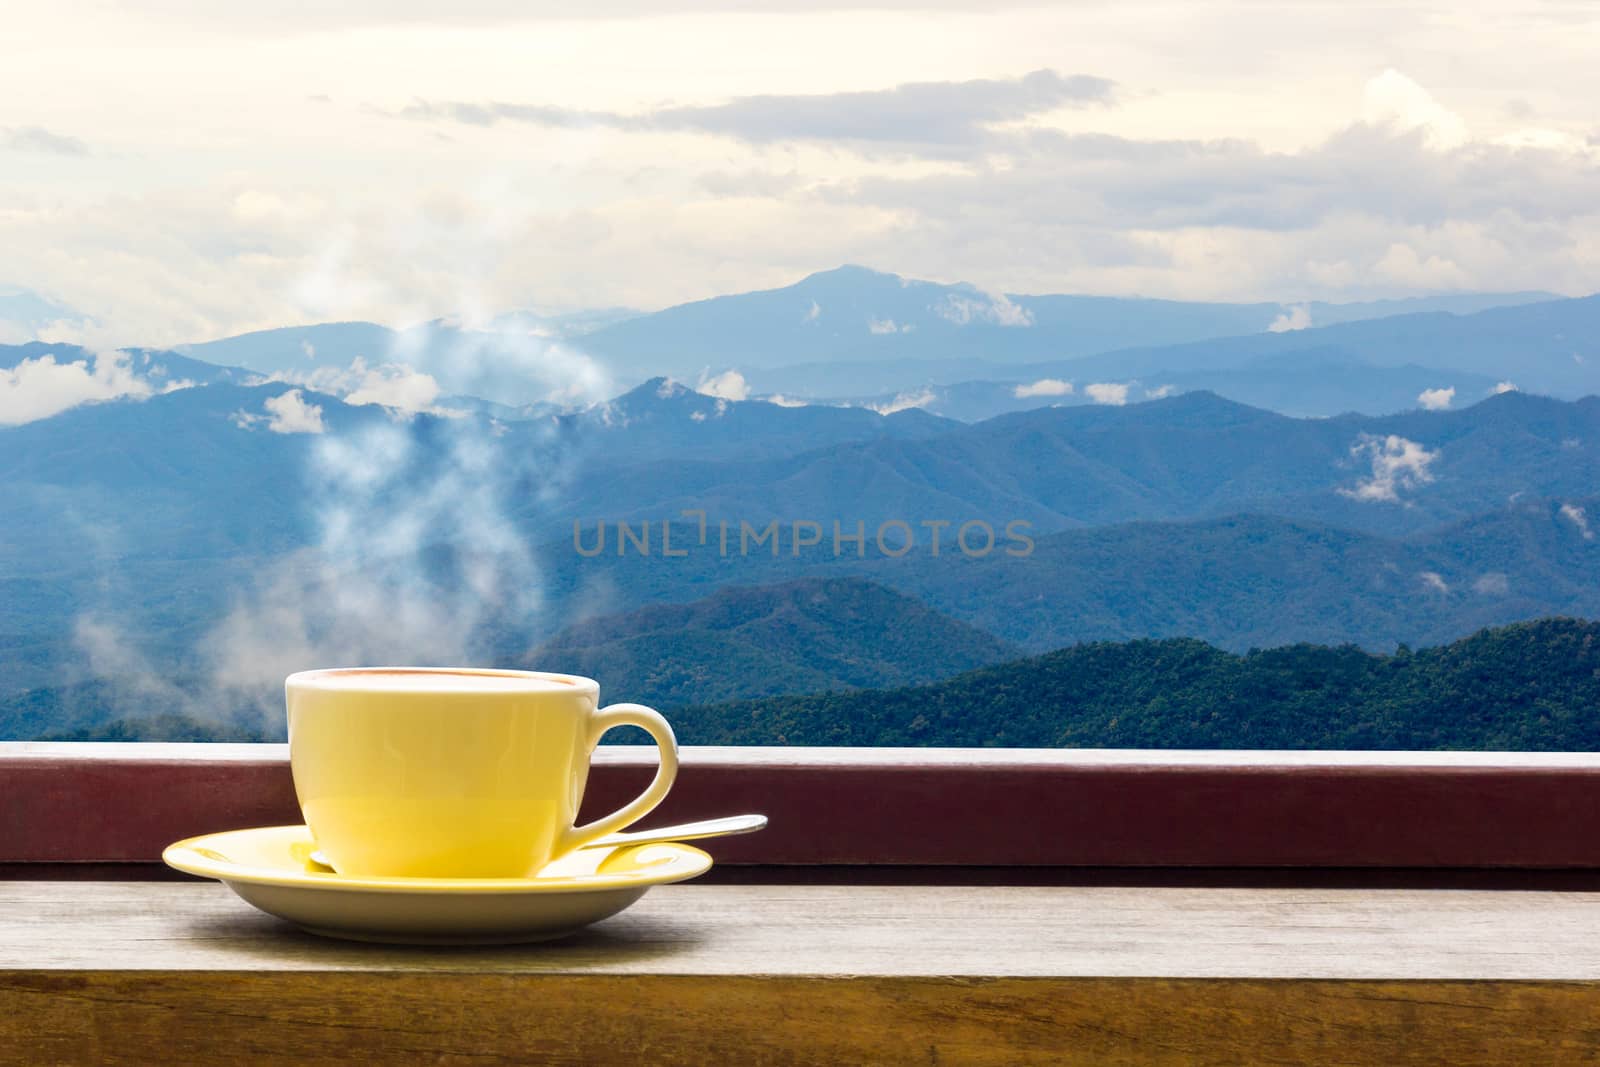 Coffee Mug On Wooden Top Table In Arial View Of Mountian.